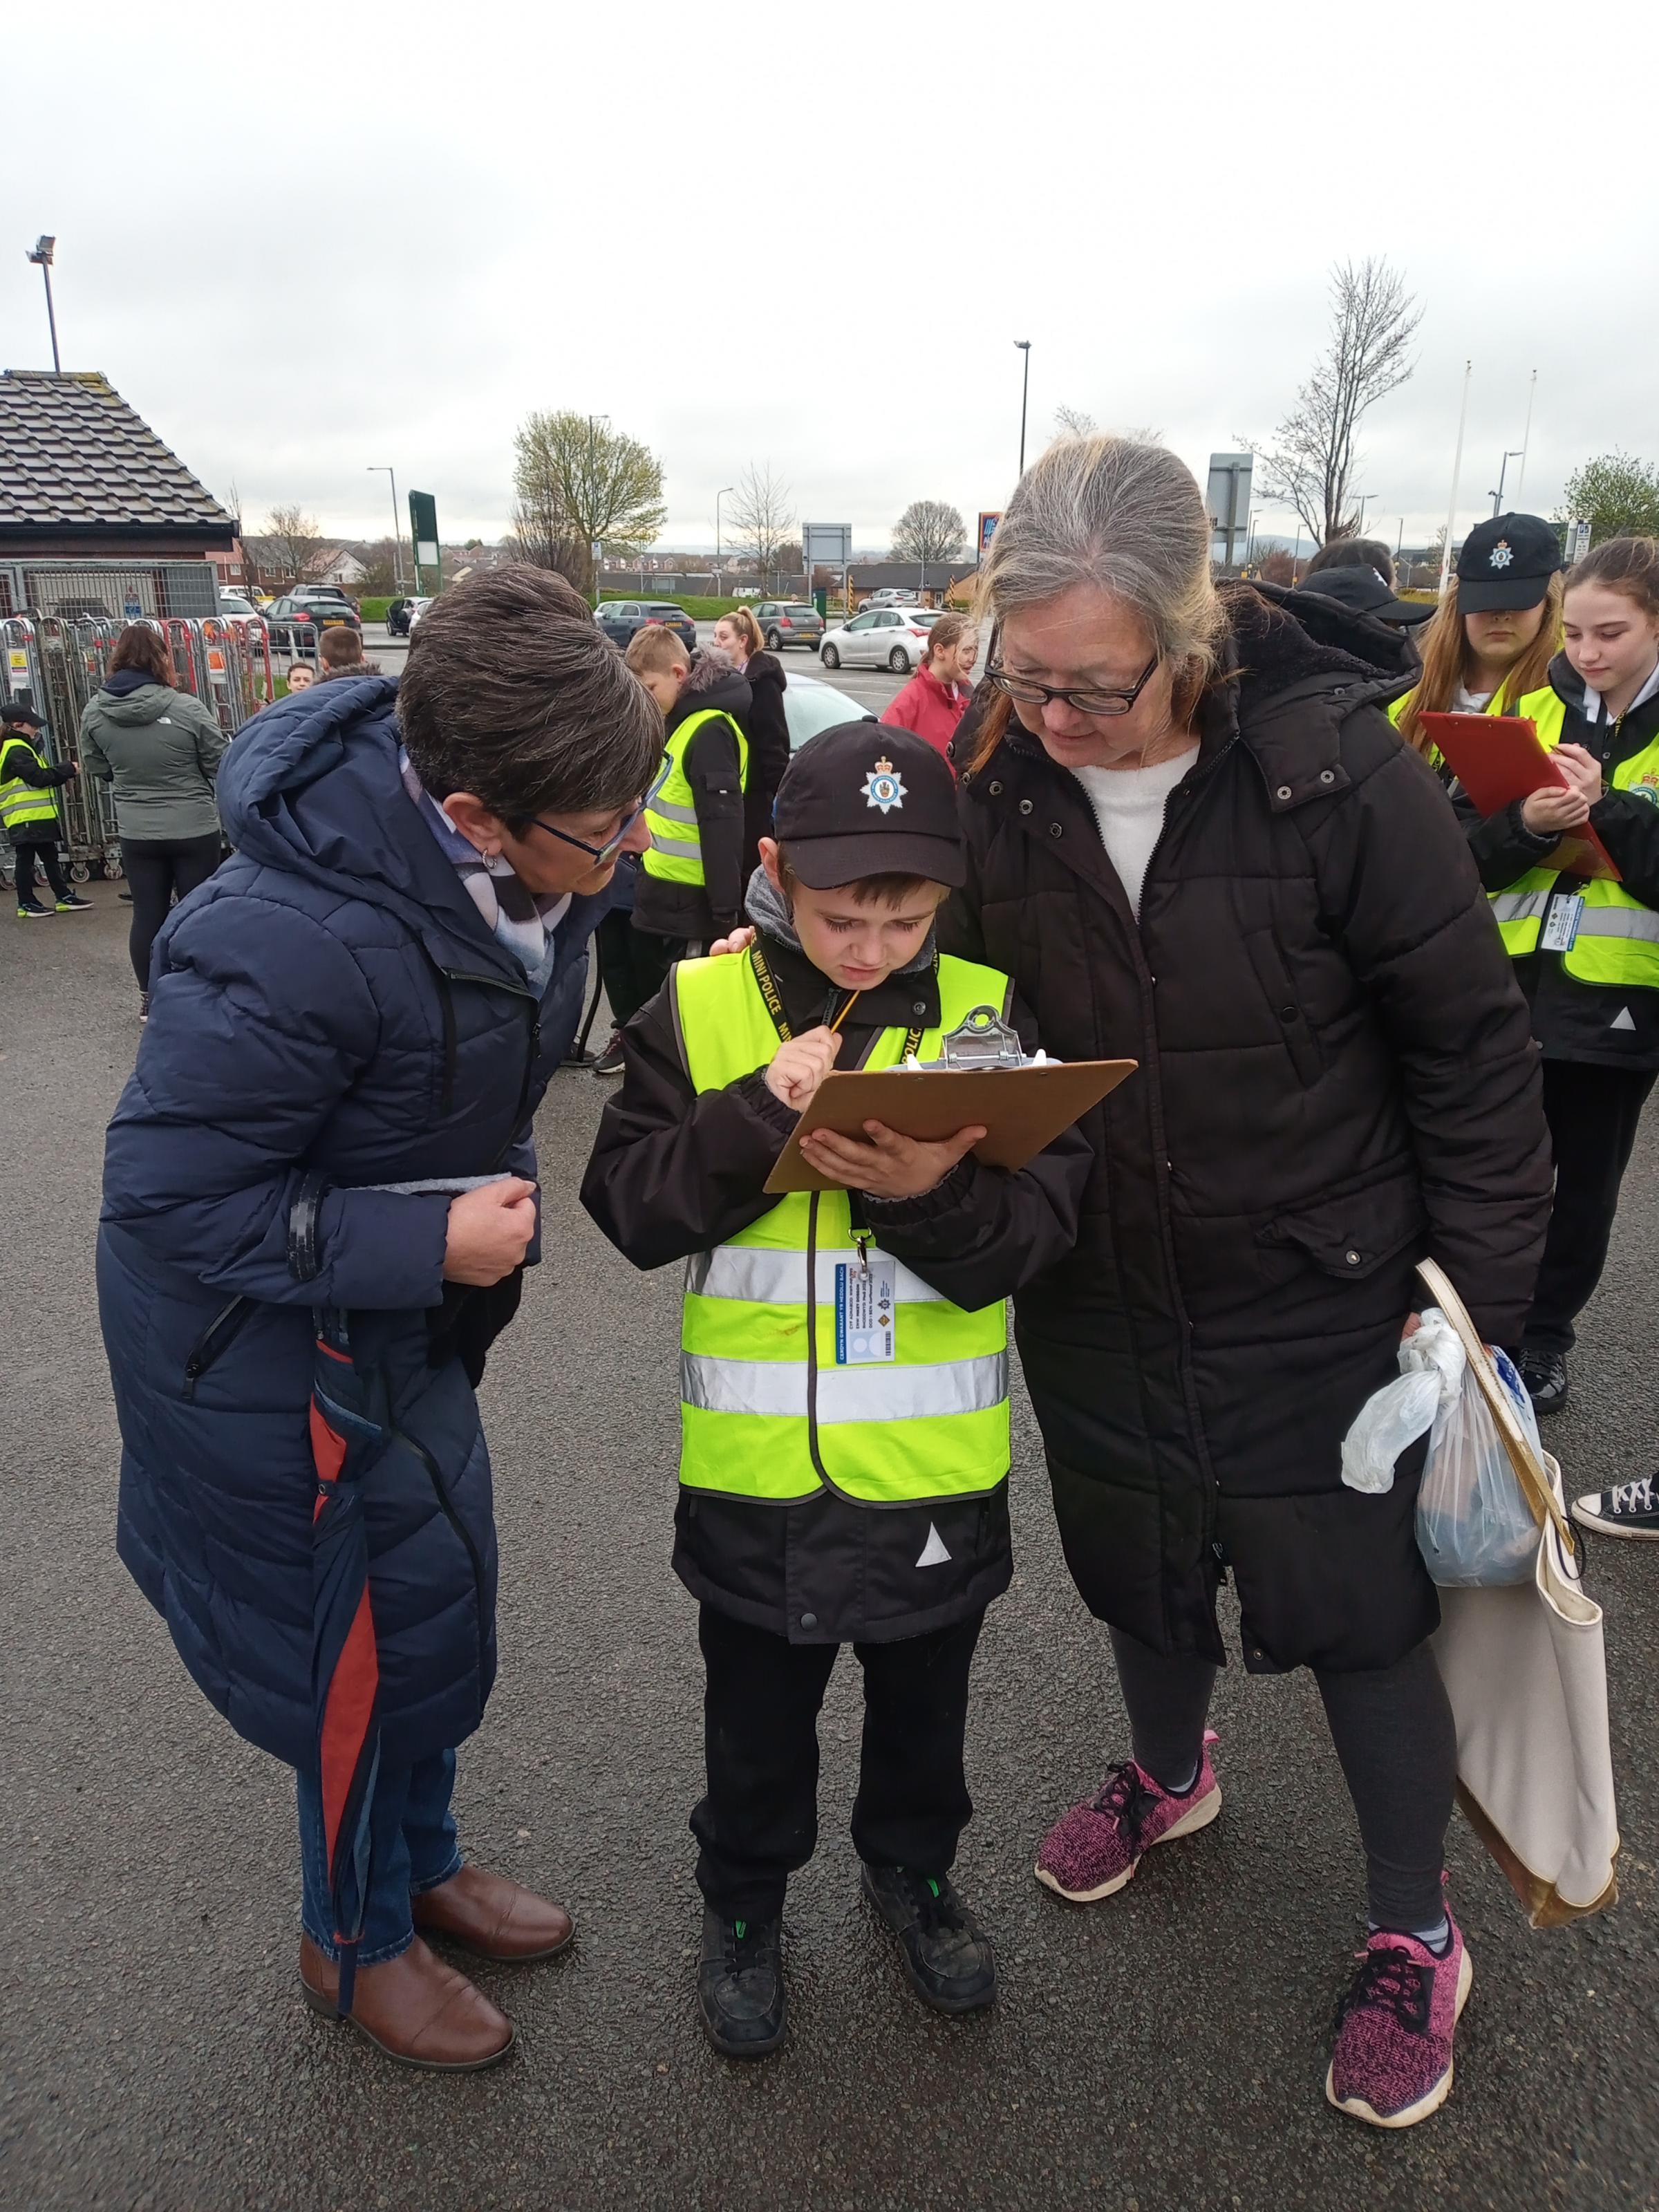 Staff member Kathy Webster and Mini Police member Mikey, interview resident Diana Payne for their survey.